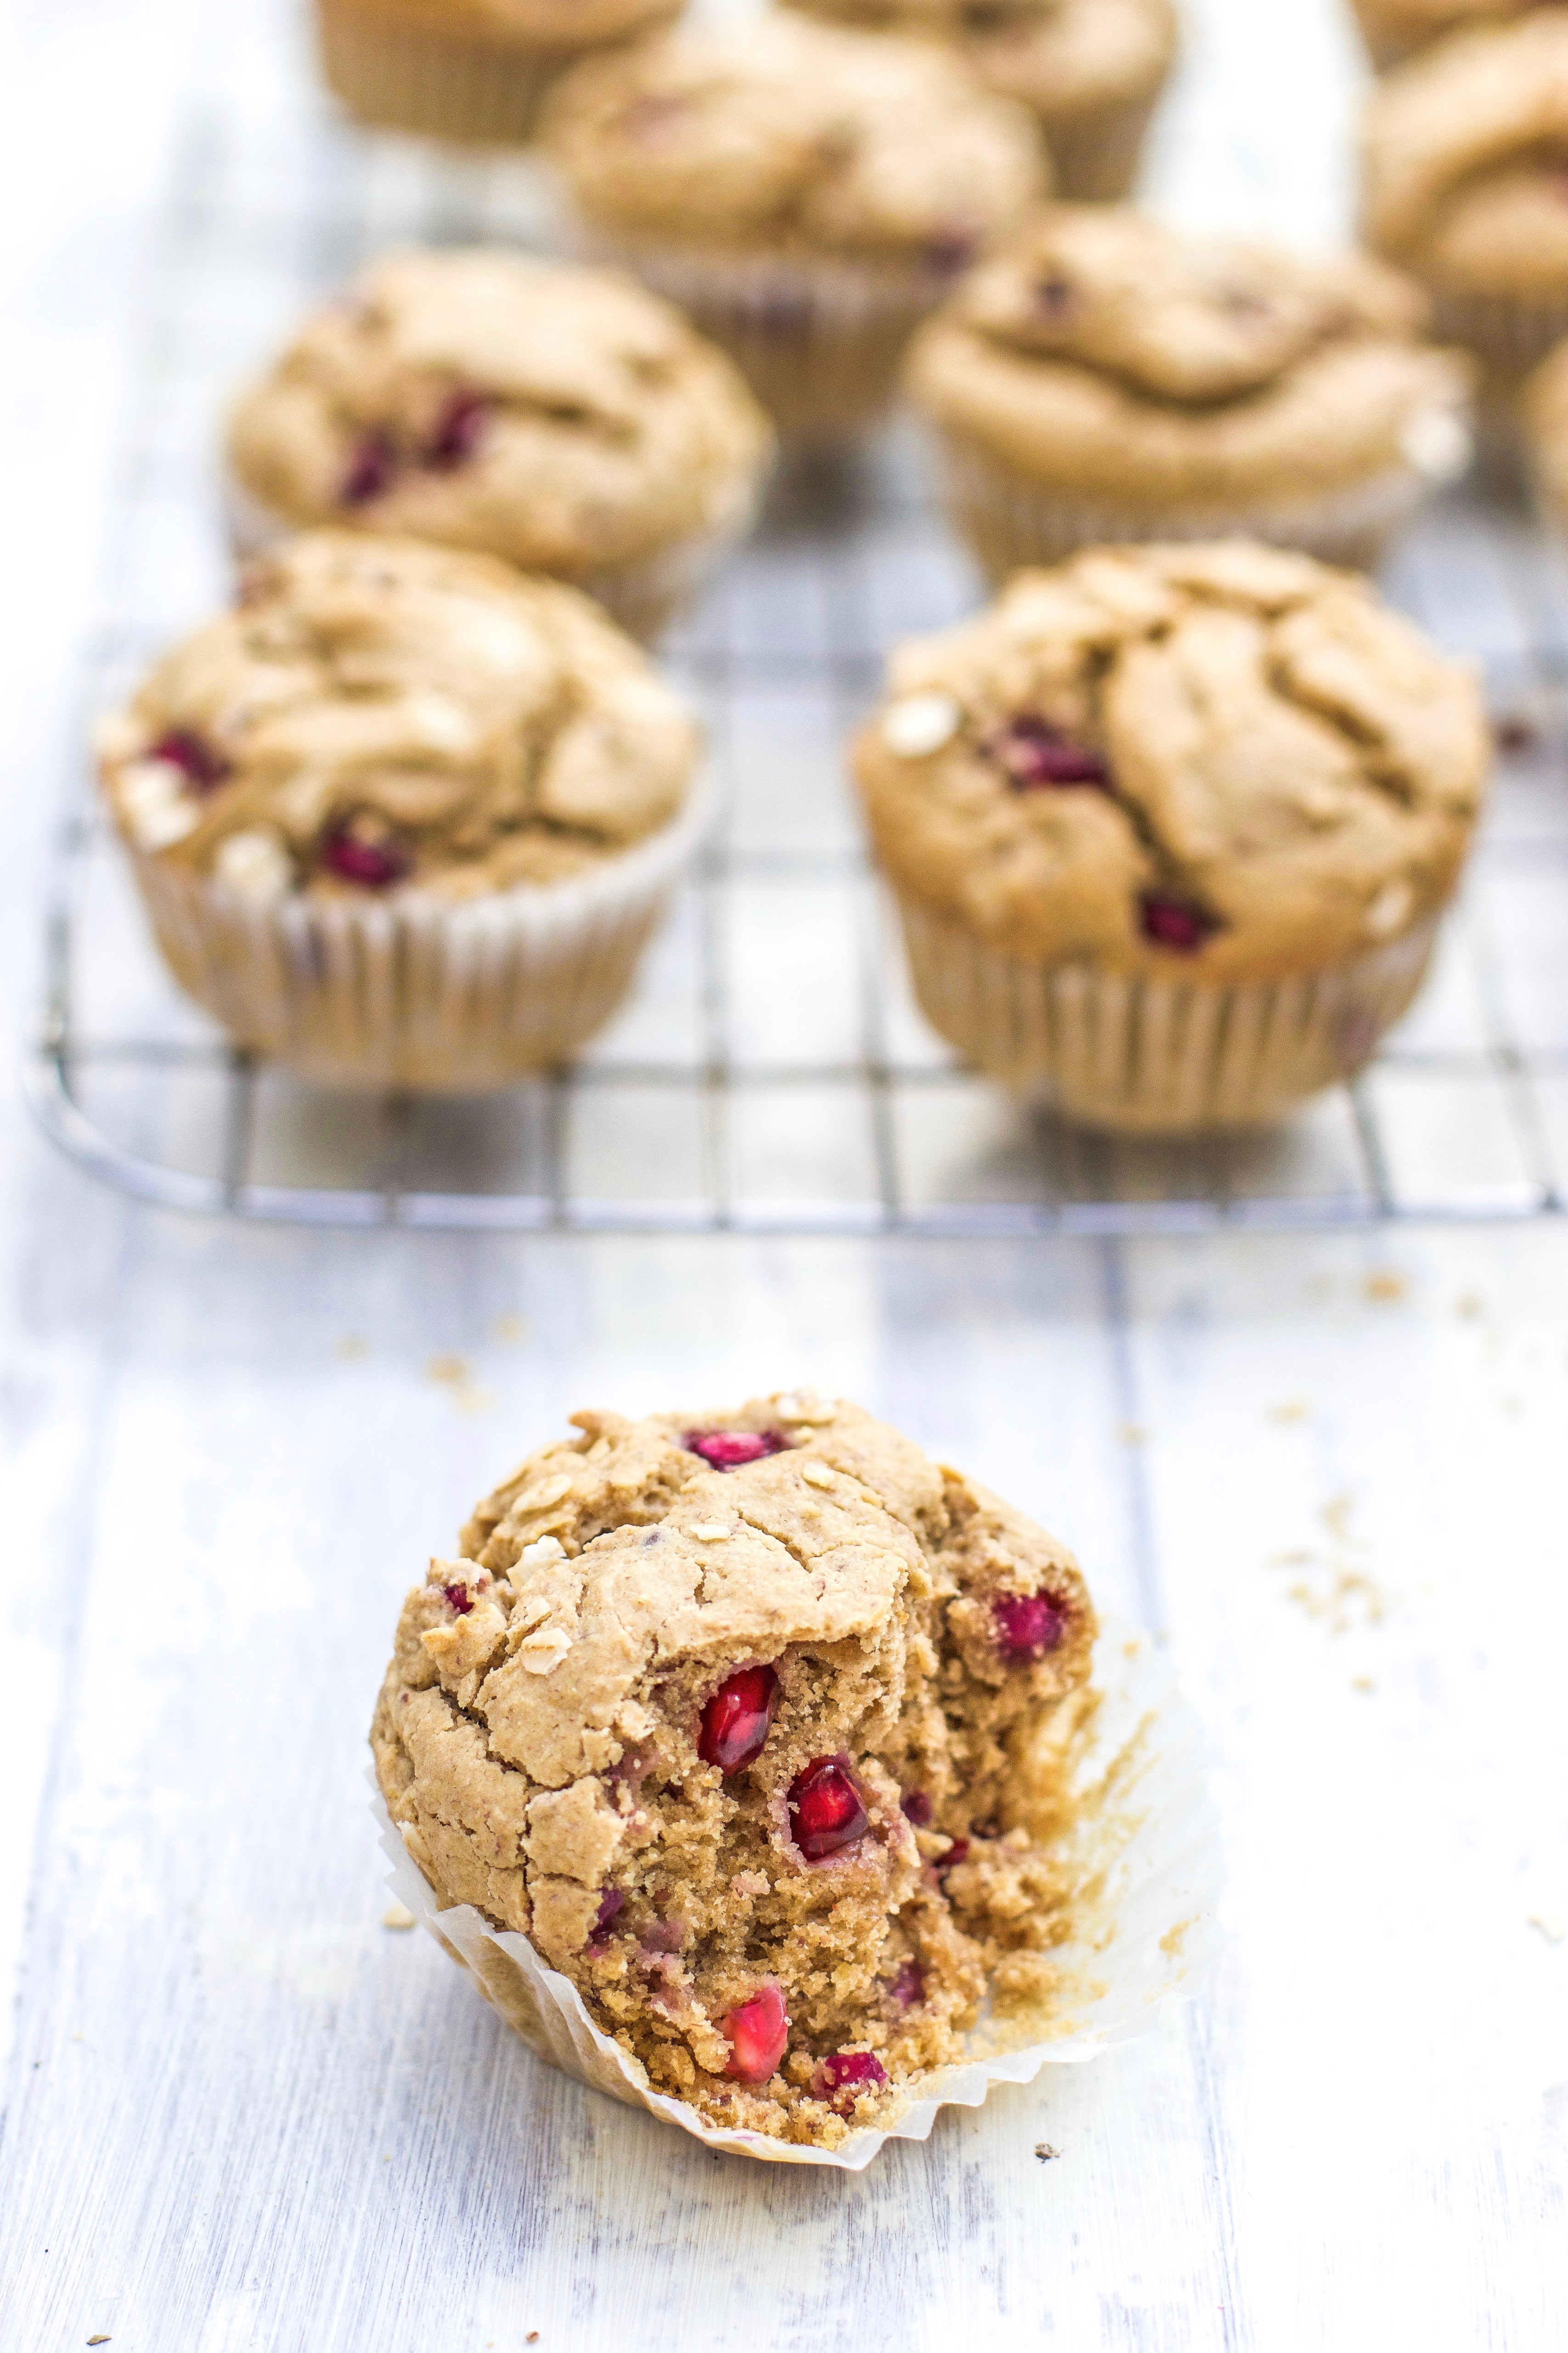 Pomegranate Muffins - The Little Green Spoon